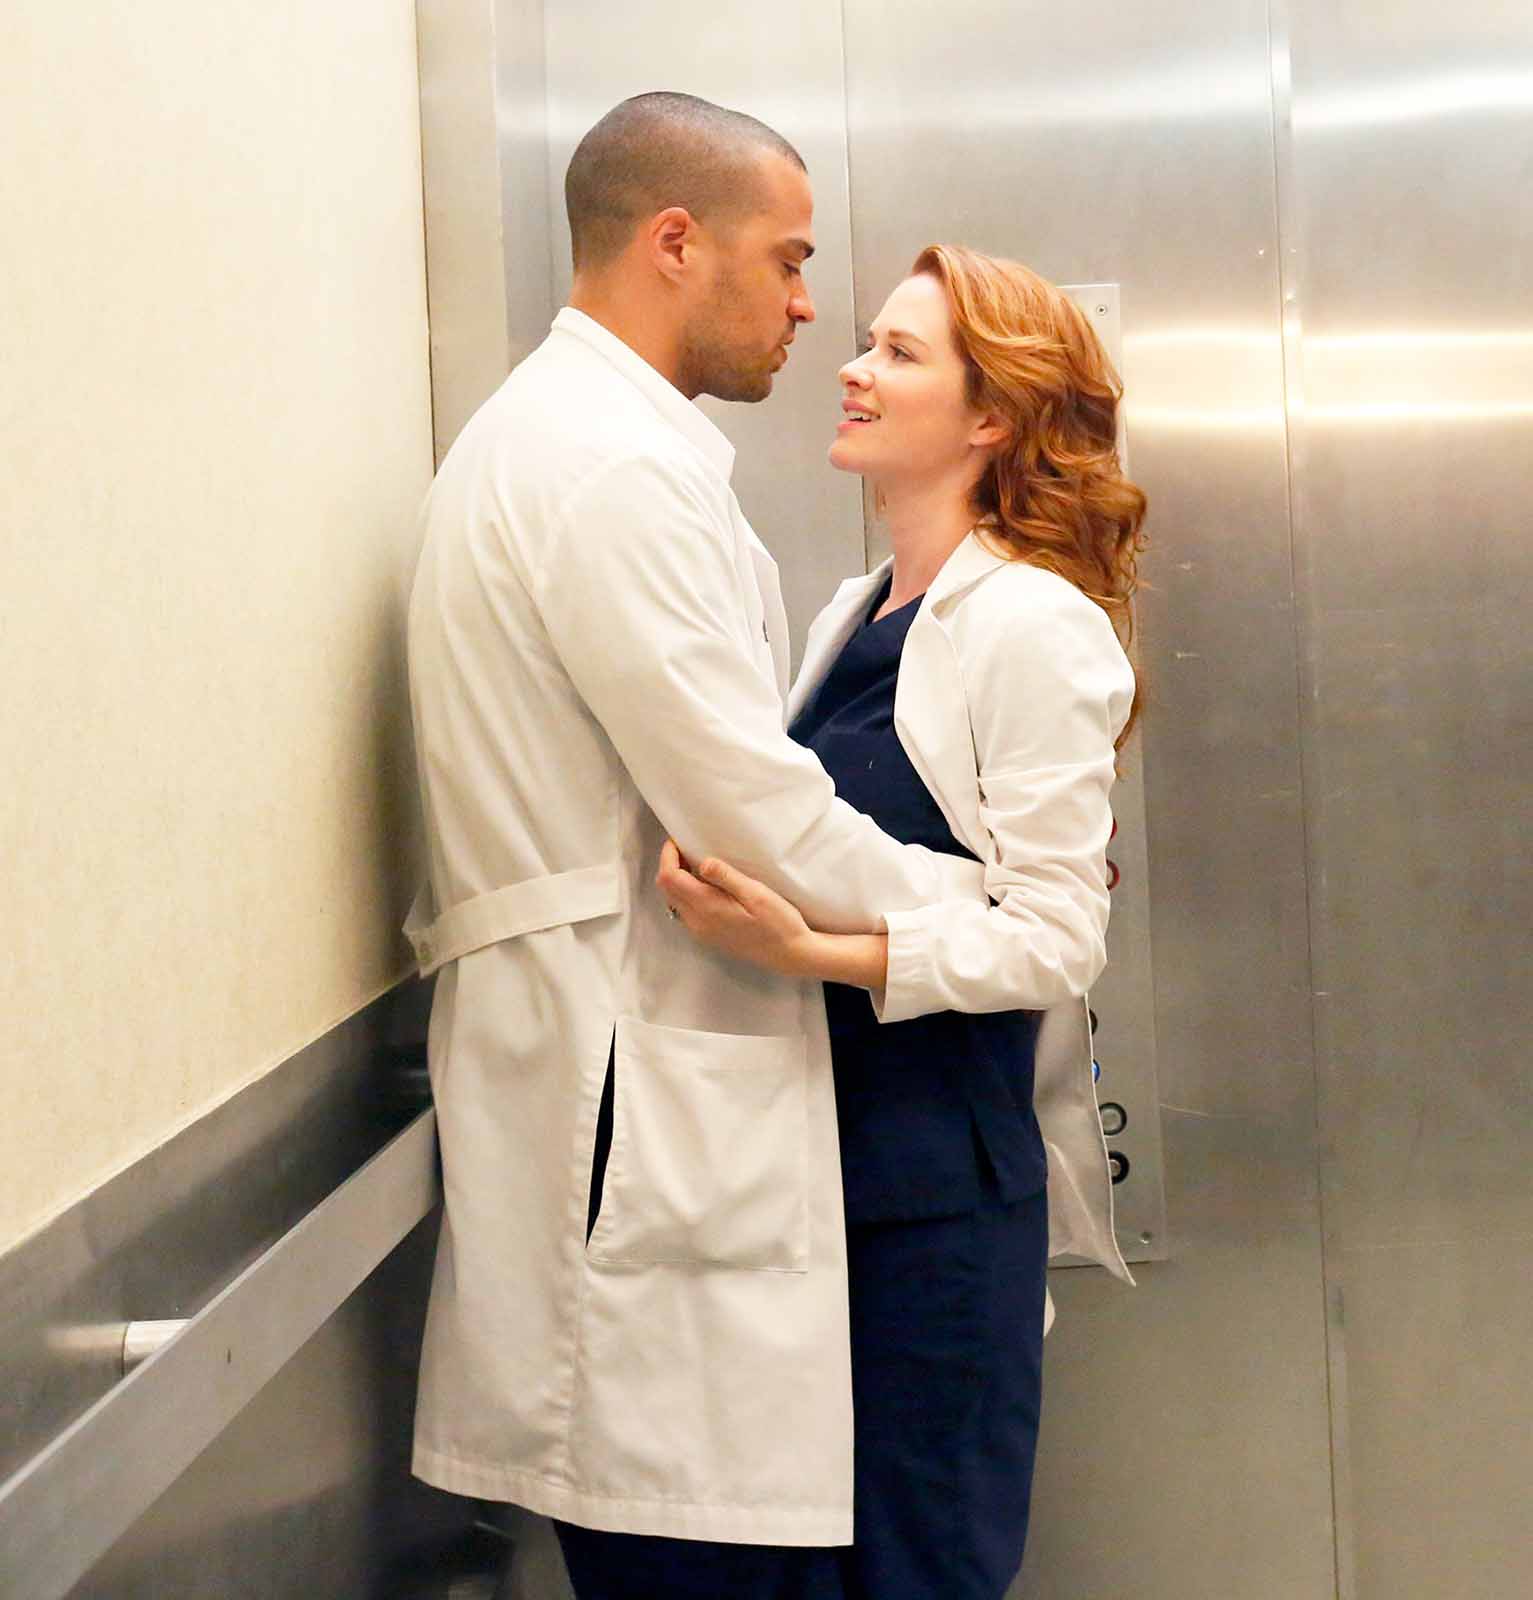 Season 17 of 'Grey's Anatomy' has seen the return of many iconic characters. Peek behind the scenes to see who else is coming back.